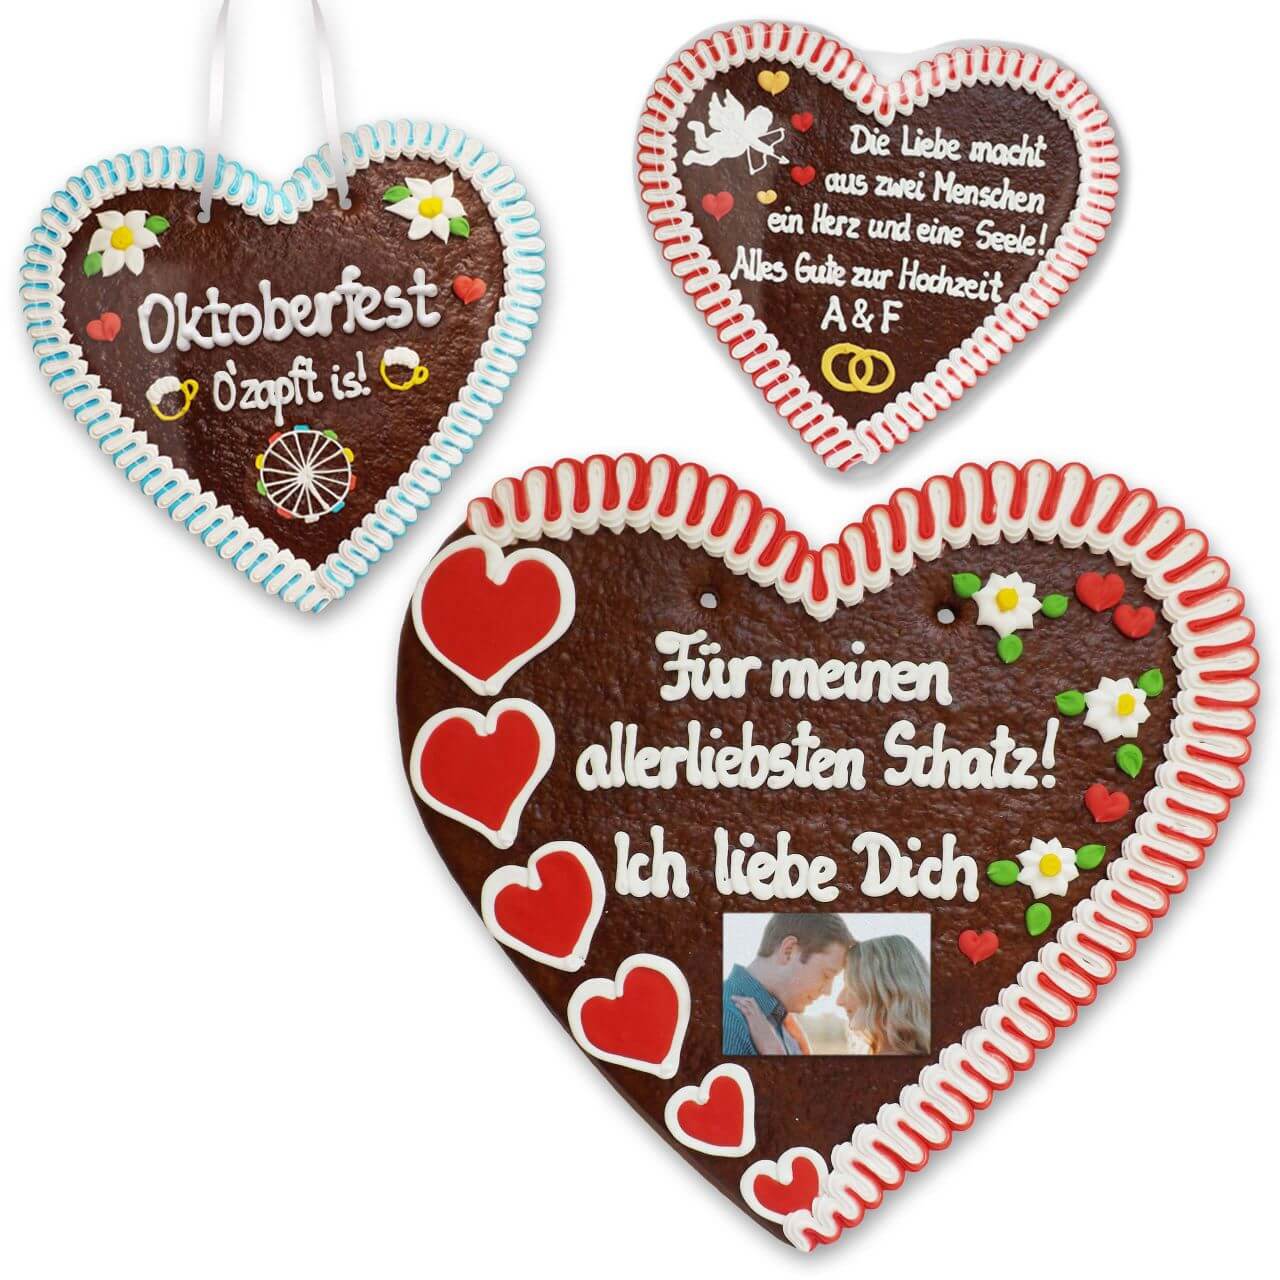 Huge 50cm gingerbread heart with individual text and photo